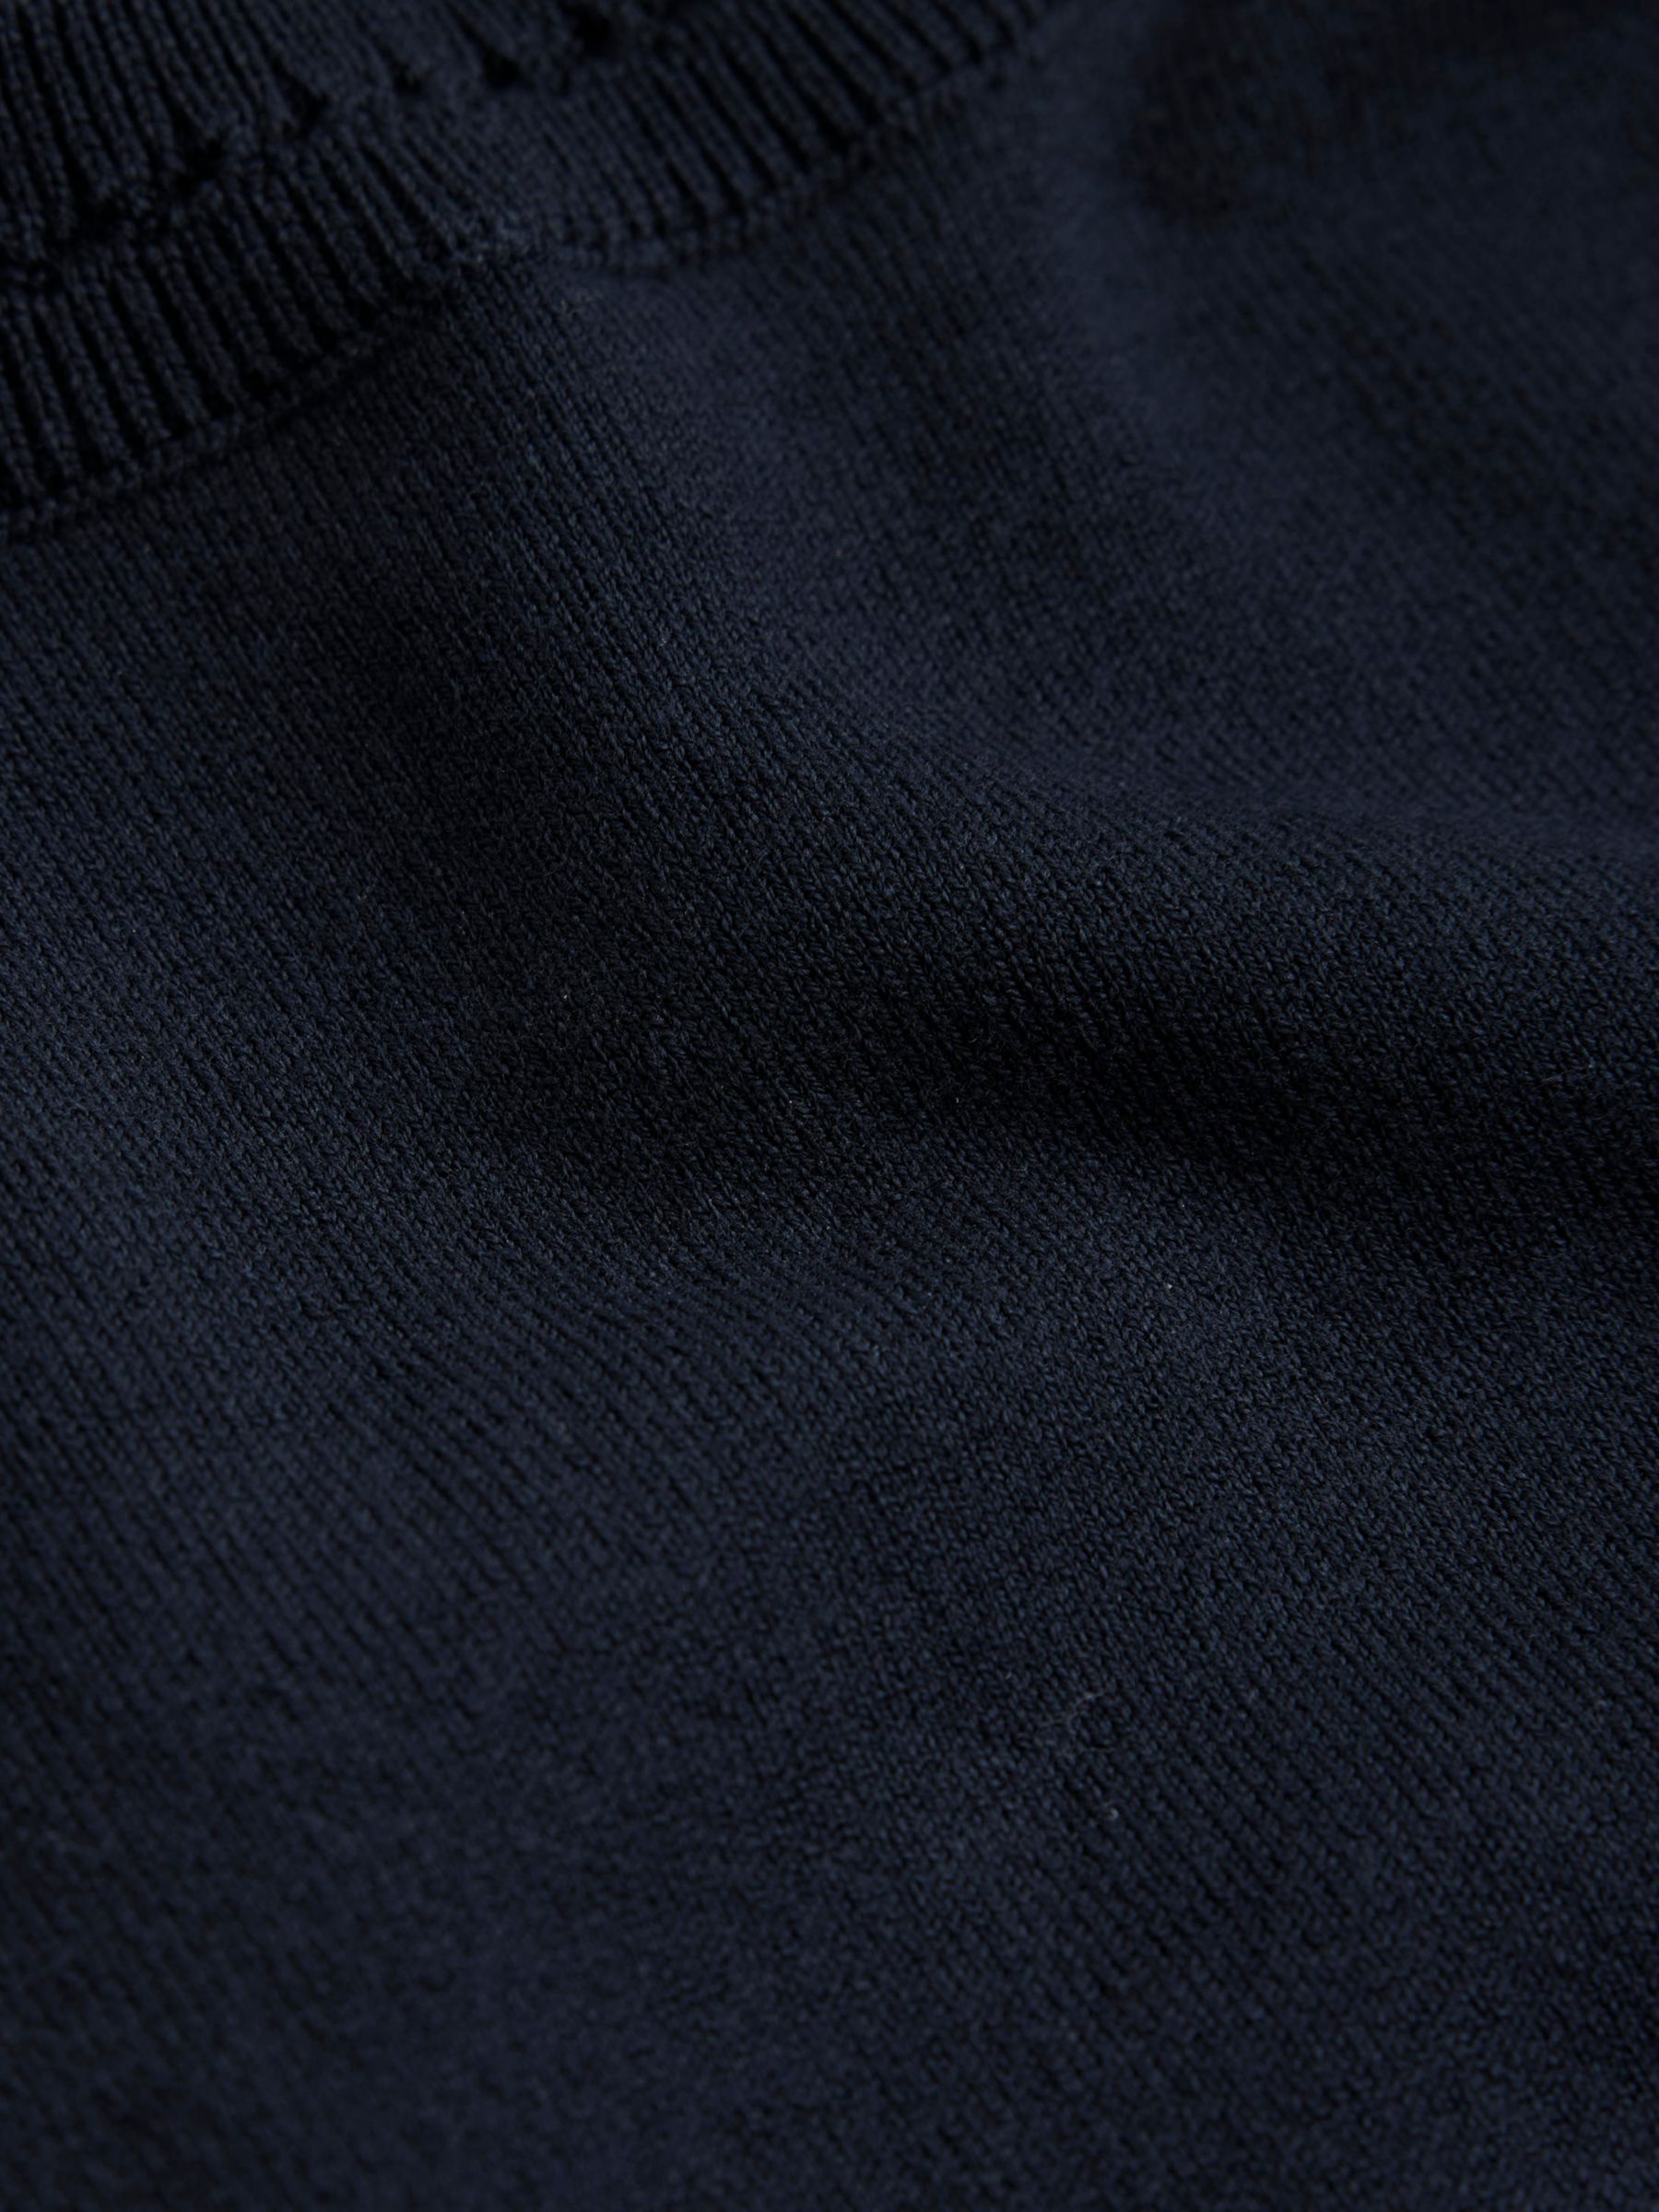 Boden Catriona Cotton Crew Neck Jumper, Navy at John Lewis & Partners